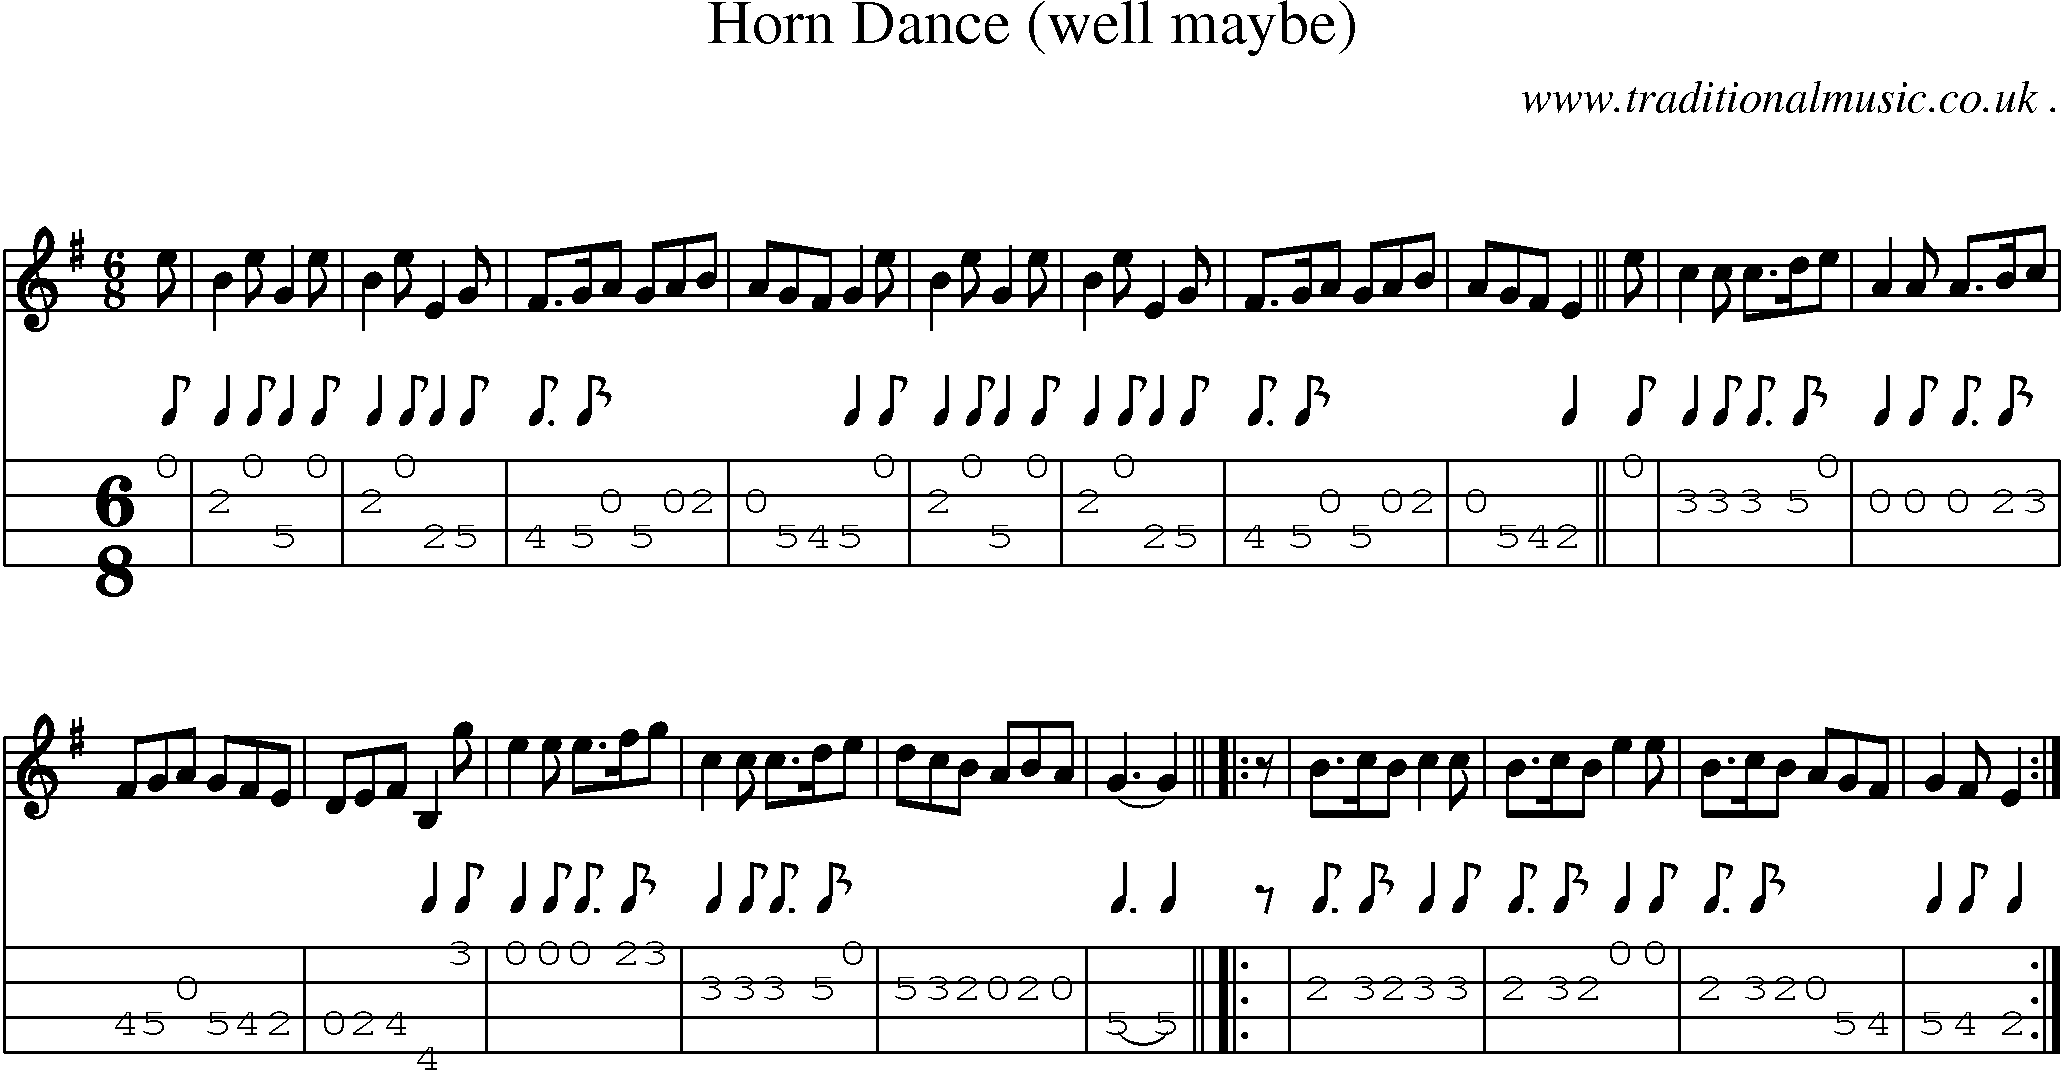 Sheet-music  score, Chords and Mandolin Tabs for Horn Dance Well Maybe